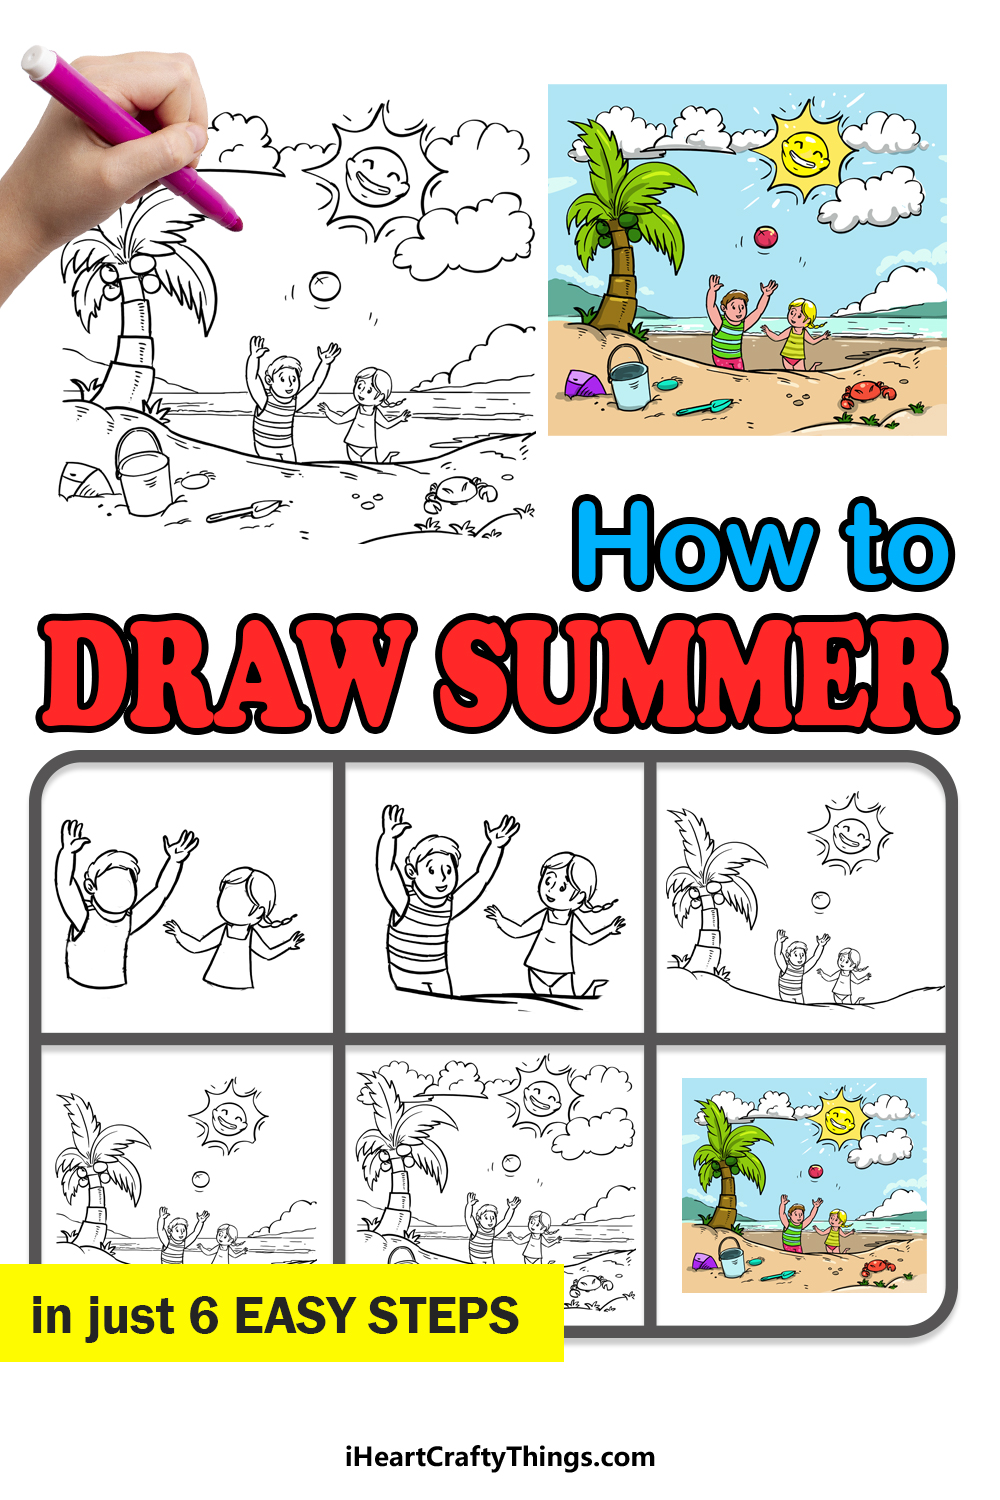 How to Draw Summer step by step guide